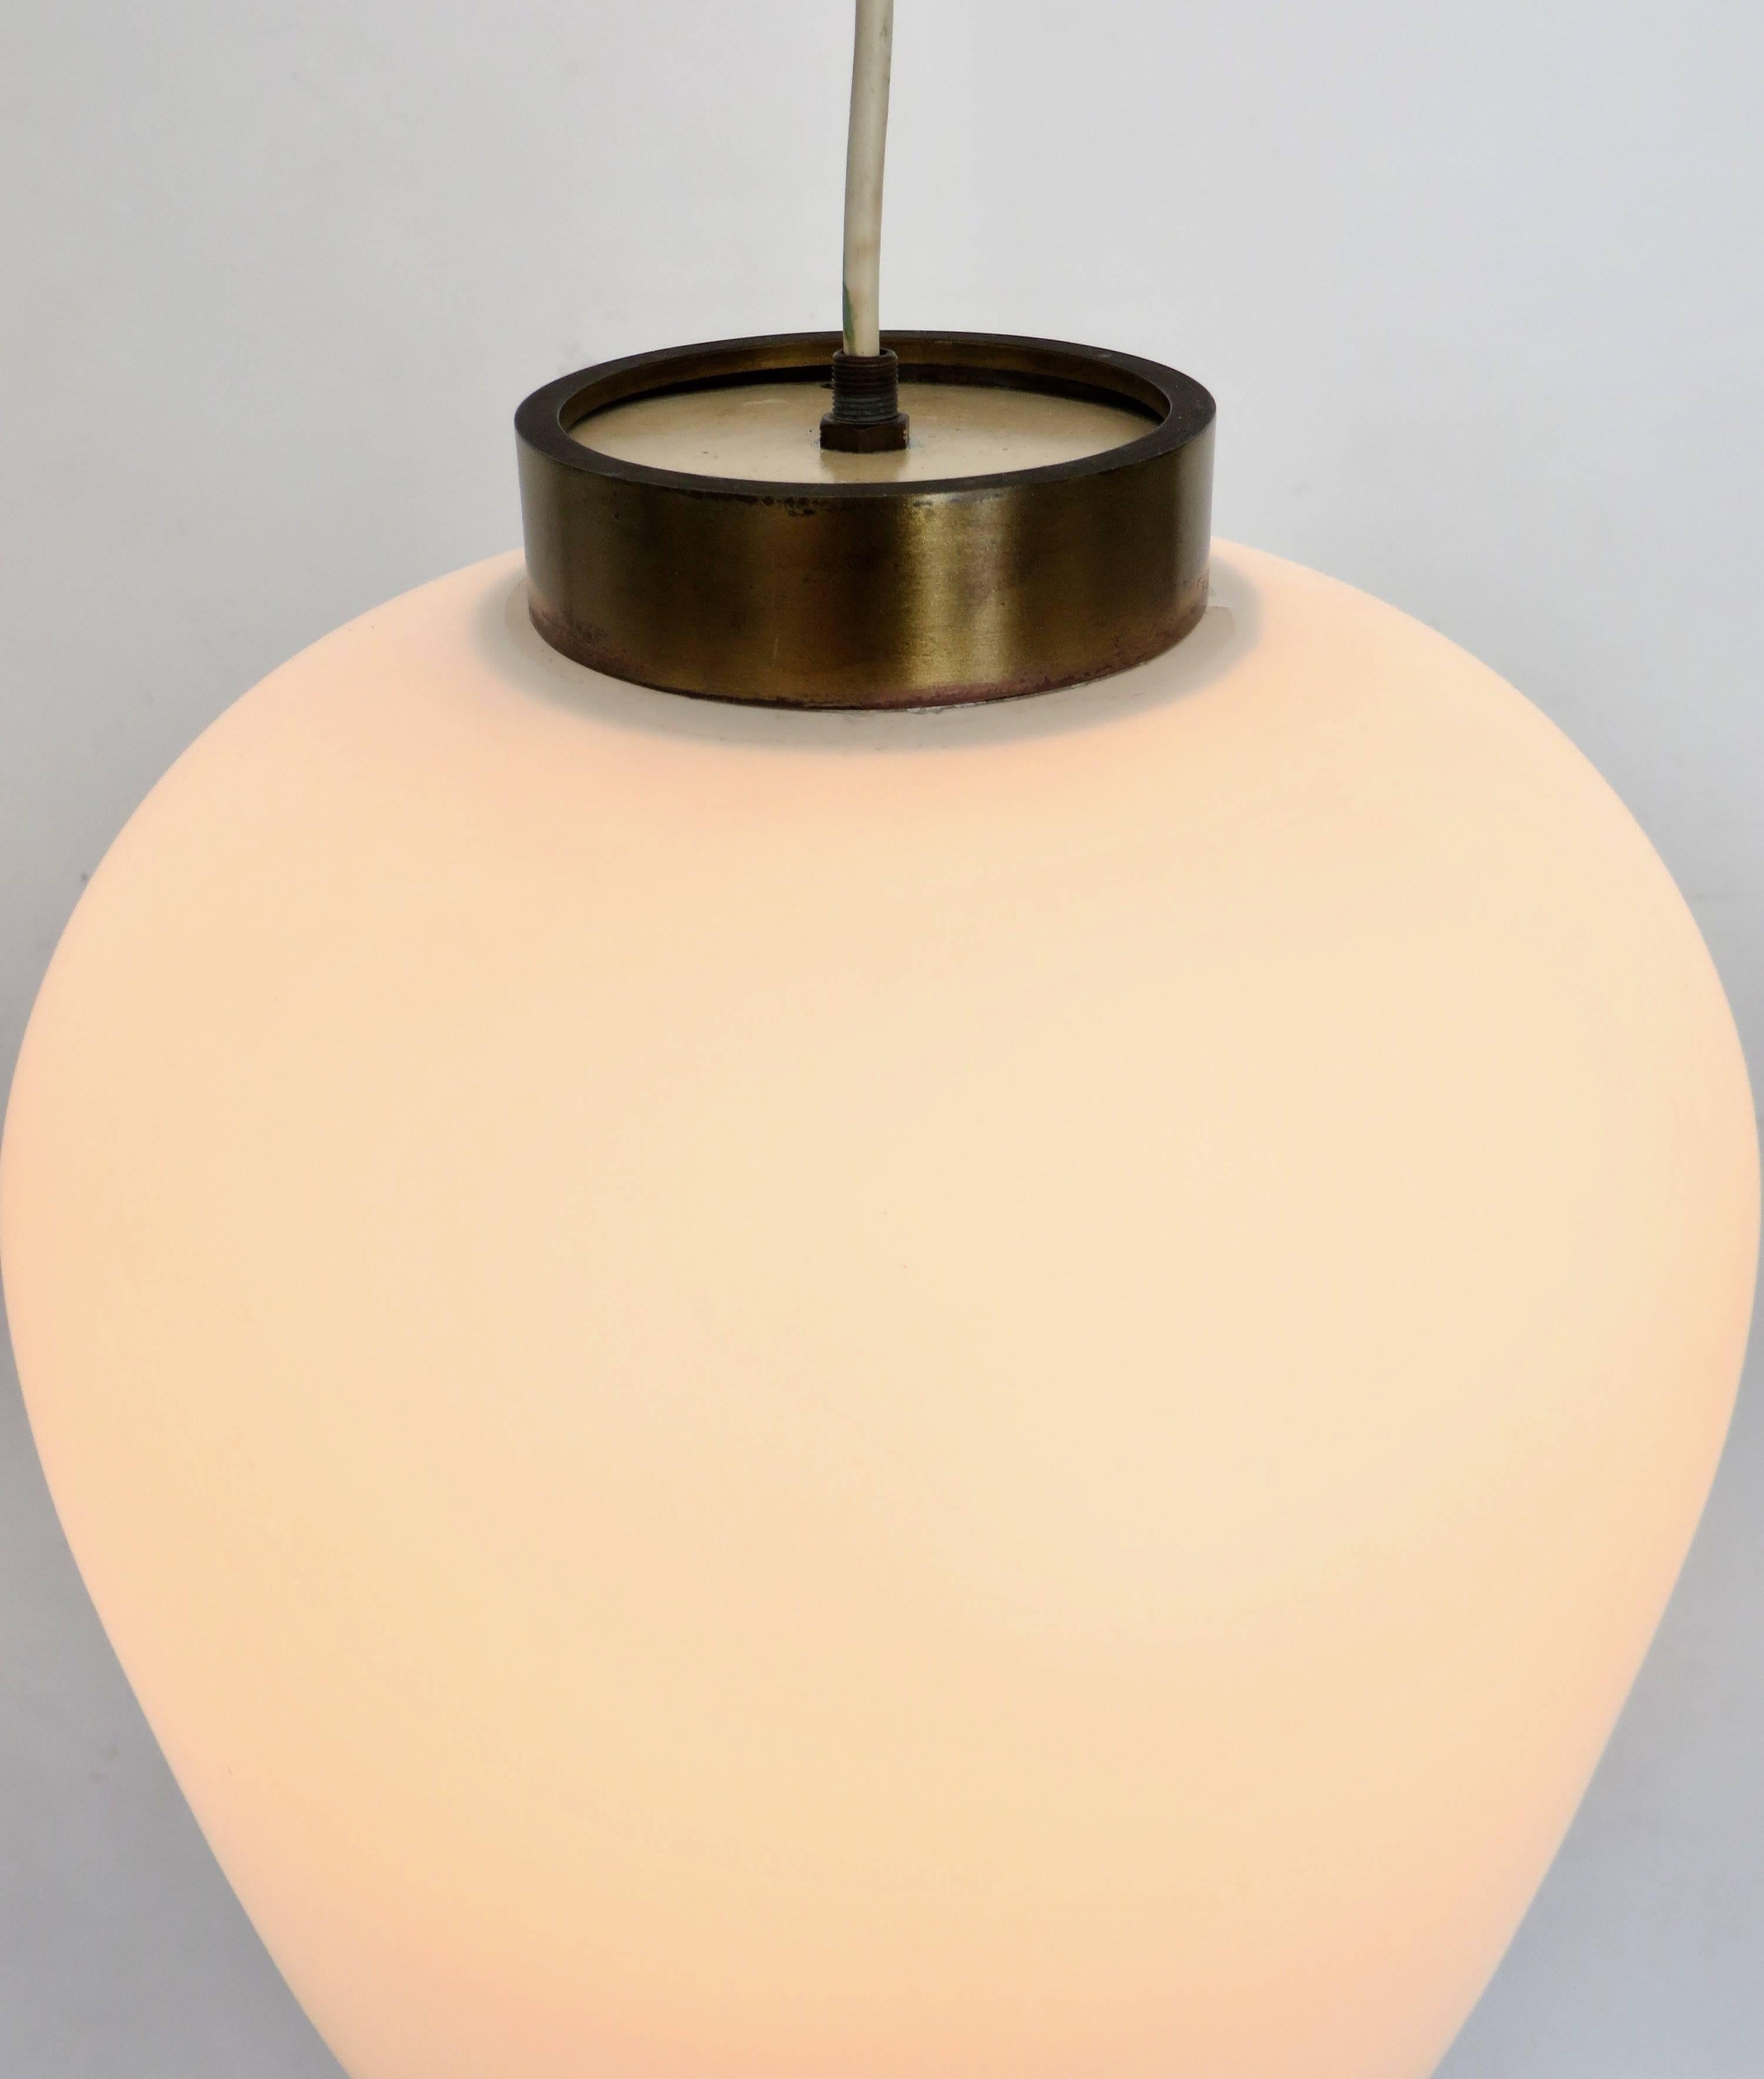 Stilnovo Italian Pendant Light Fixture with Brushed Opaque Glass Diffuser 1